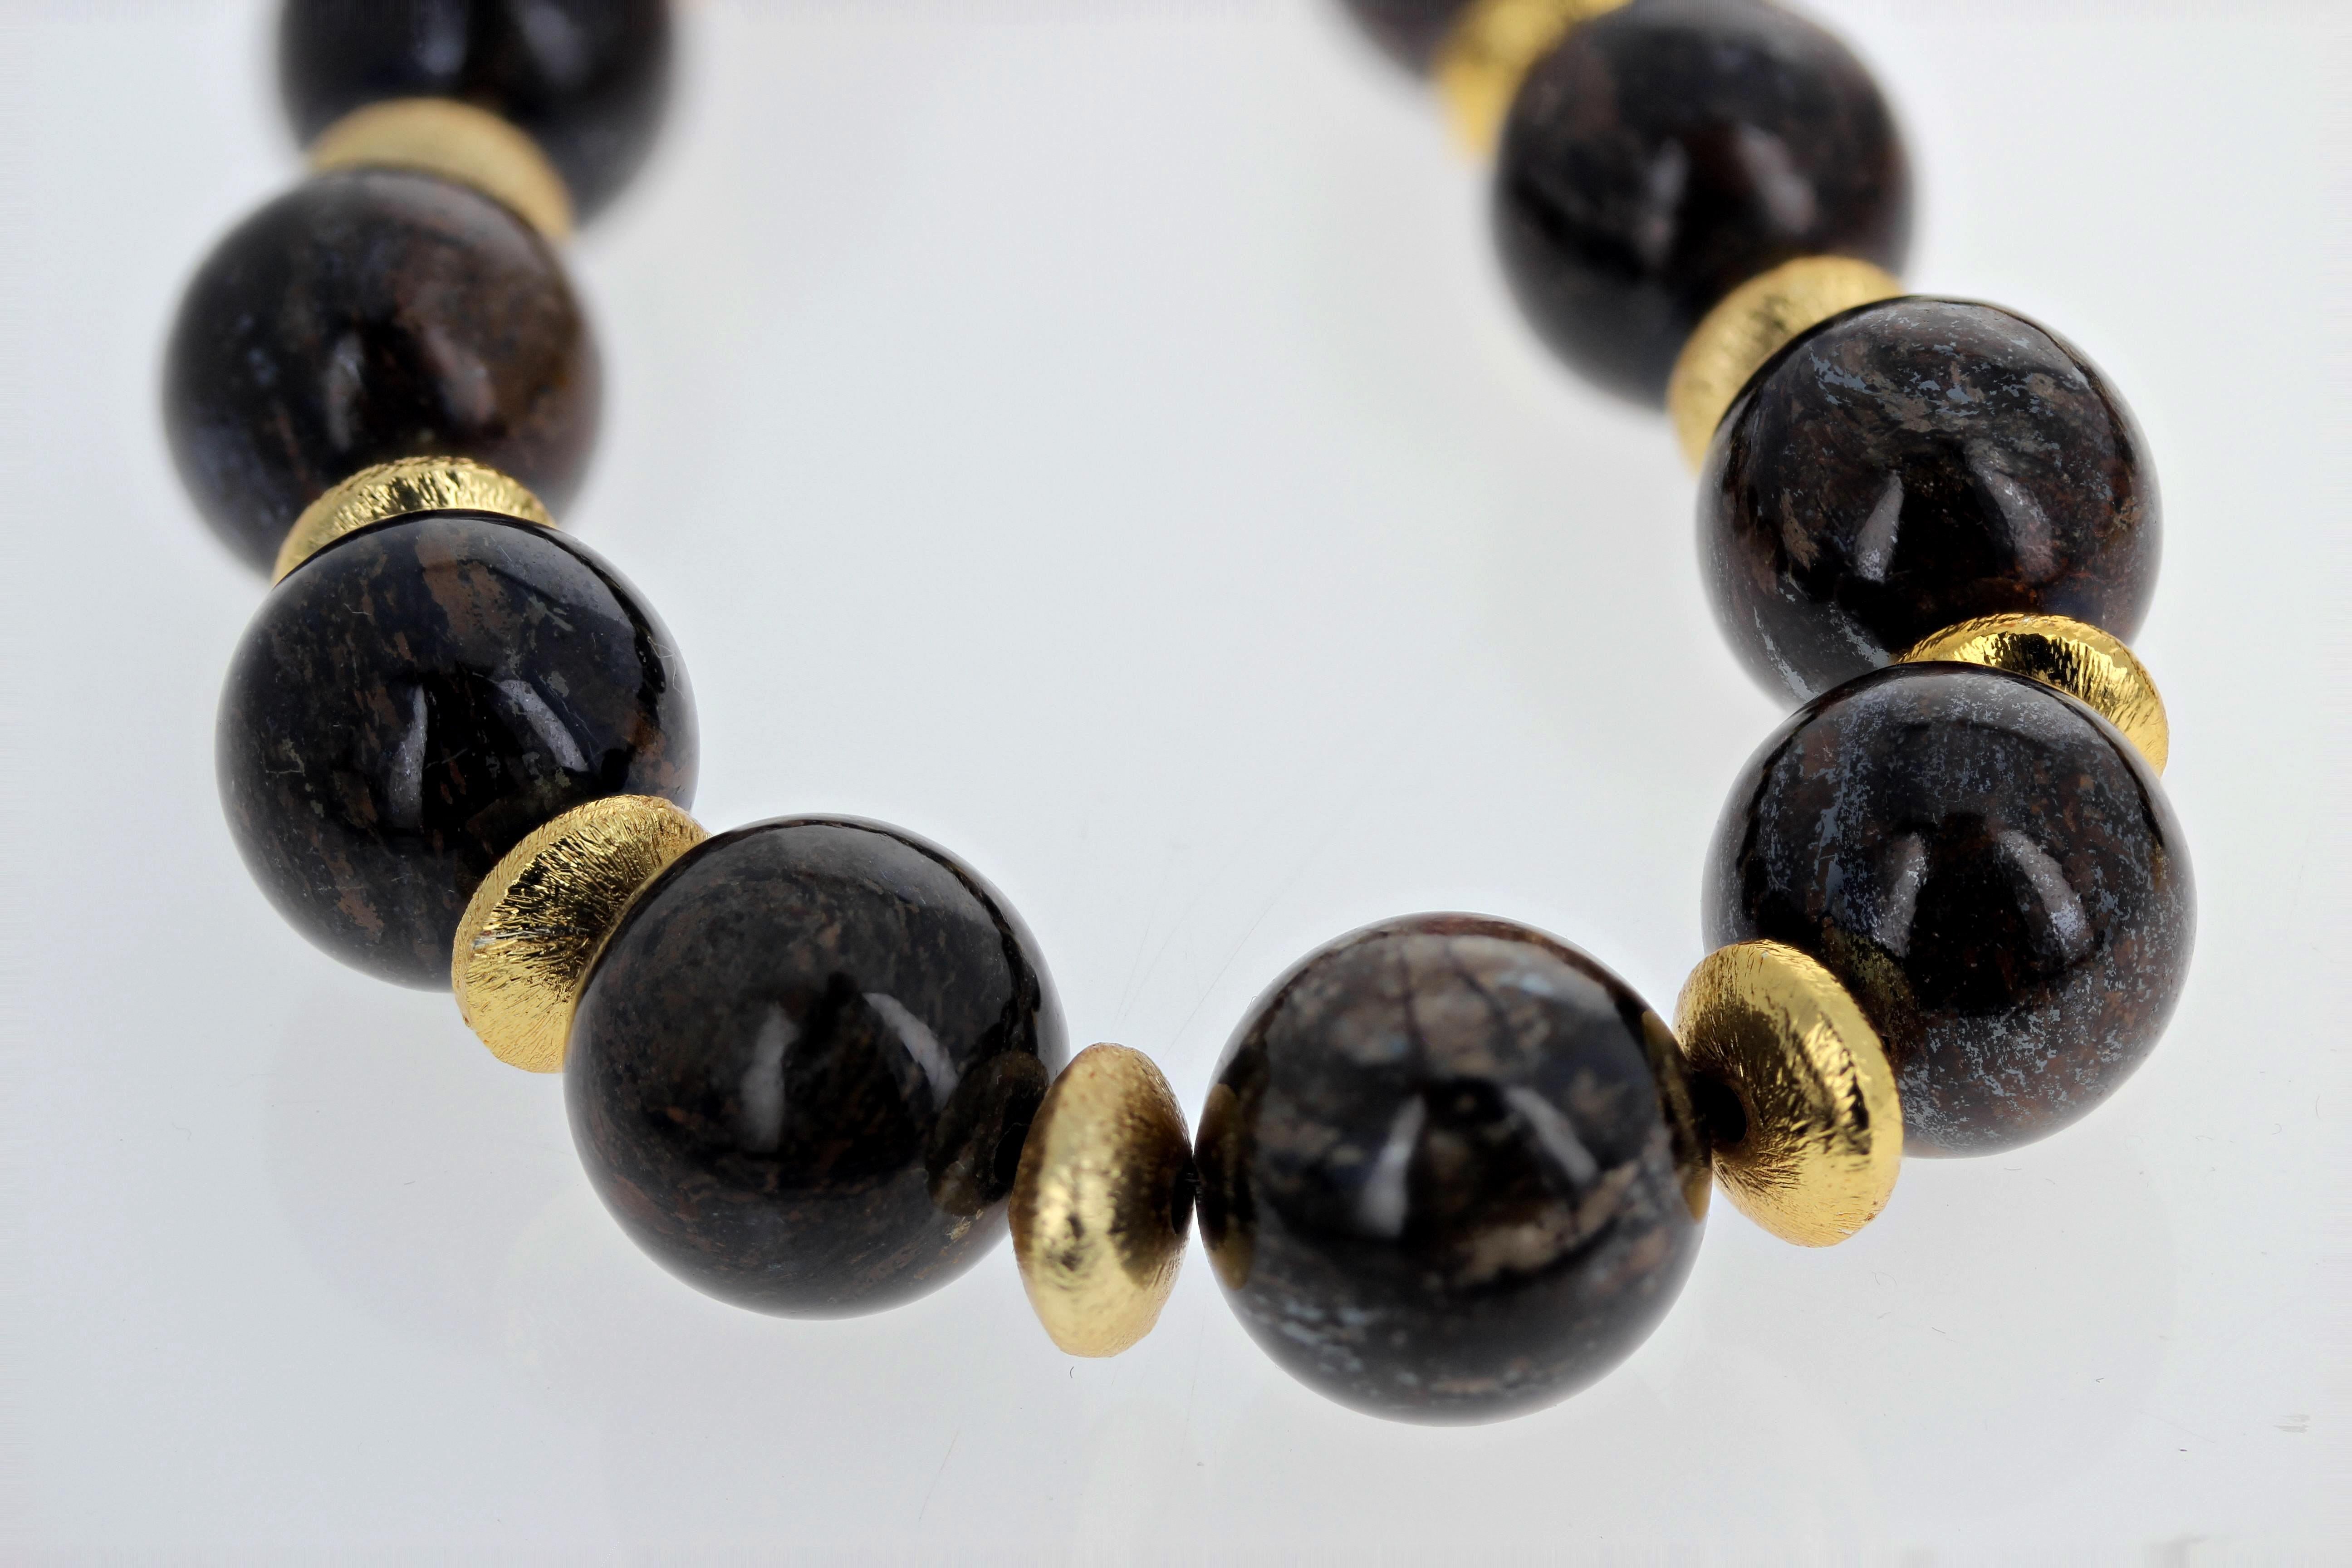 This necklace is absolutely unique consisting of real highly polished natural Bronzite 15mm gemstones enhanced with gold plated 9mm rondels. The Bronzite contains shimmering gold swirls. The clasp is gold plated easy to use hook clasp.  This it also